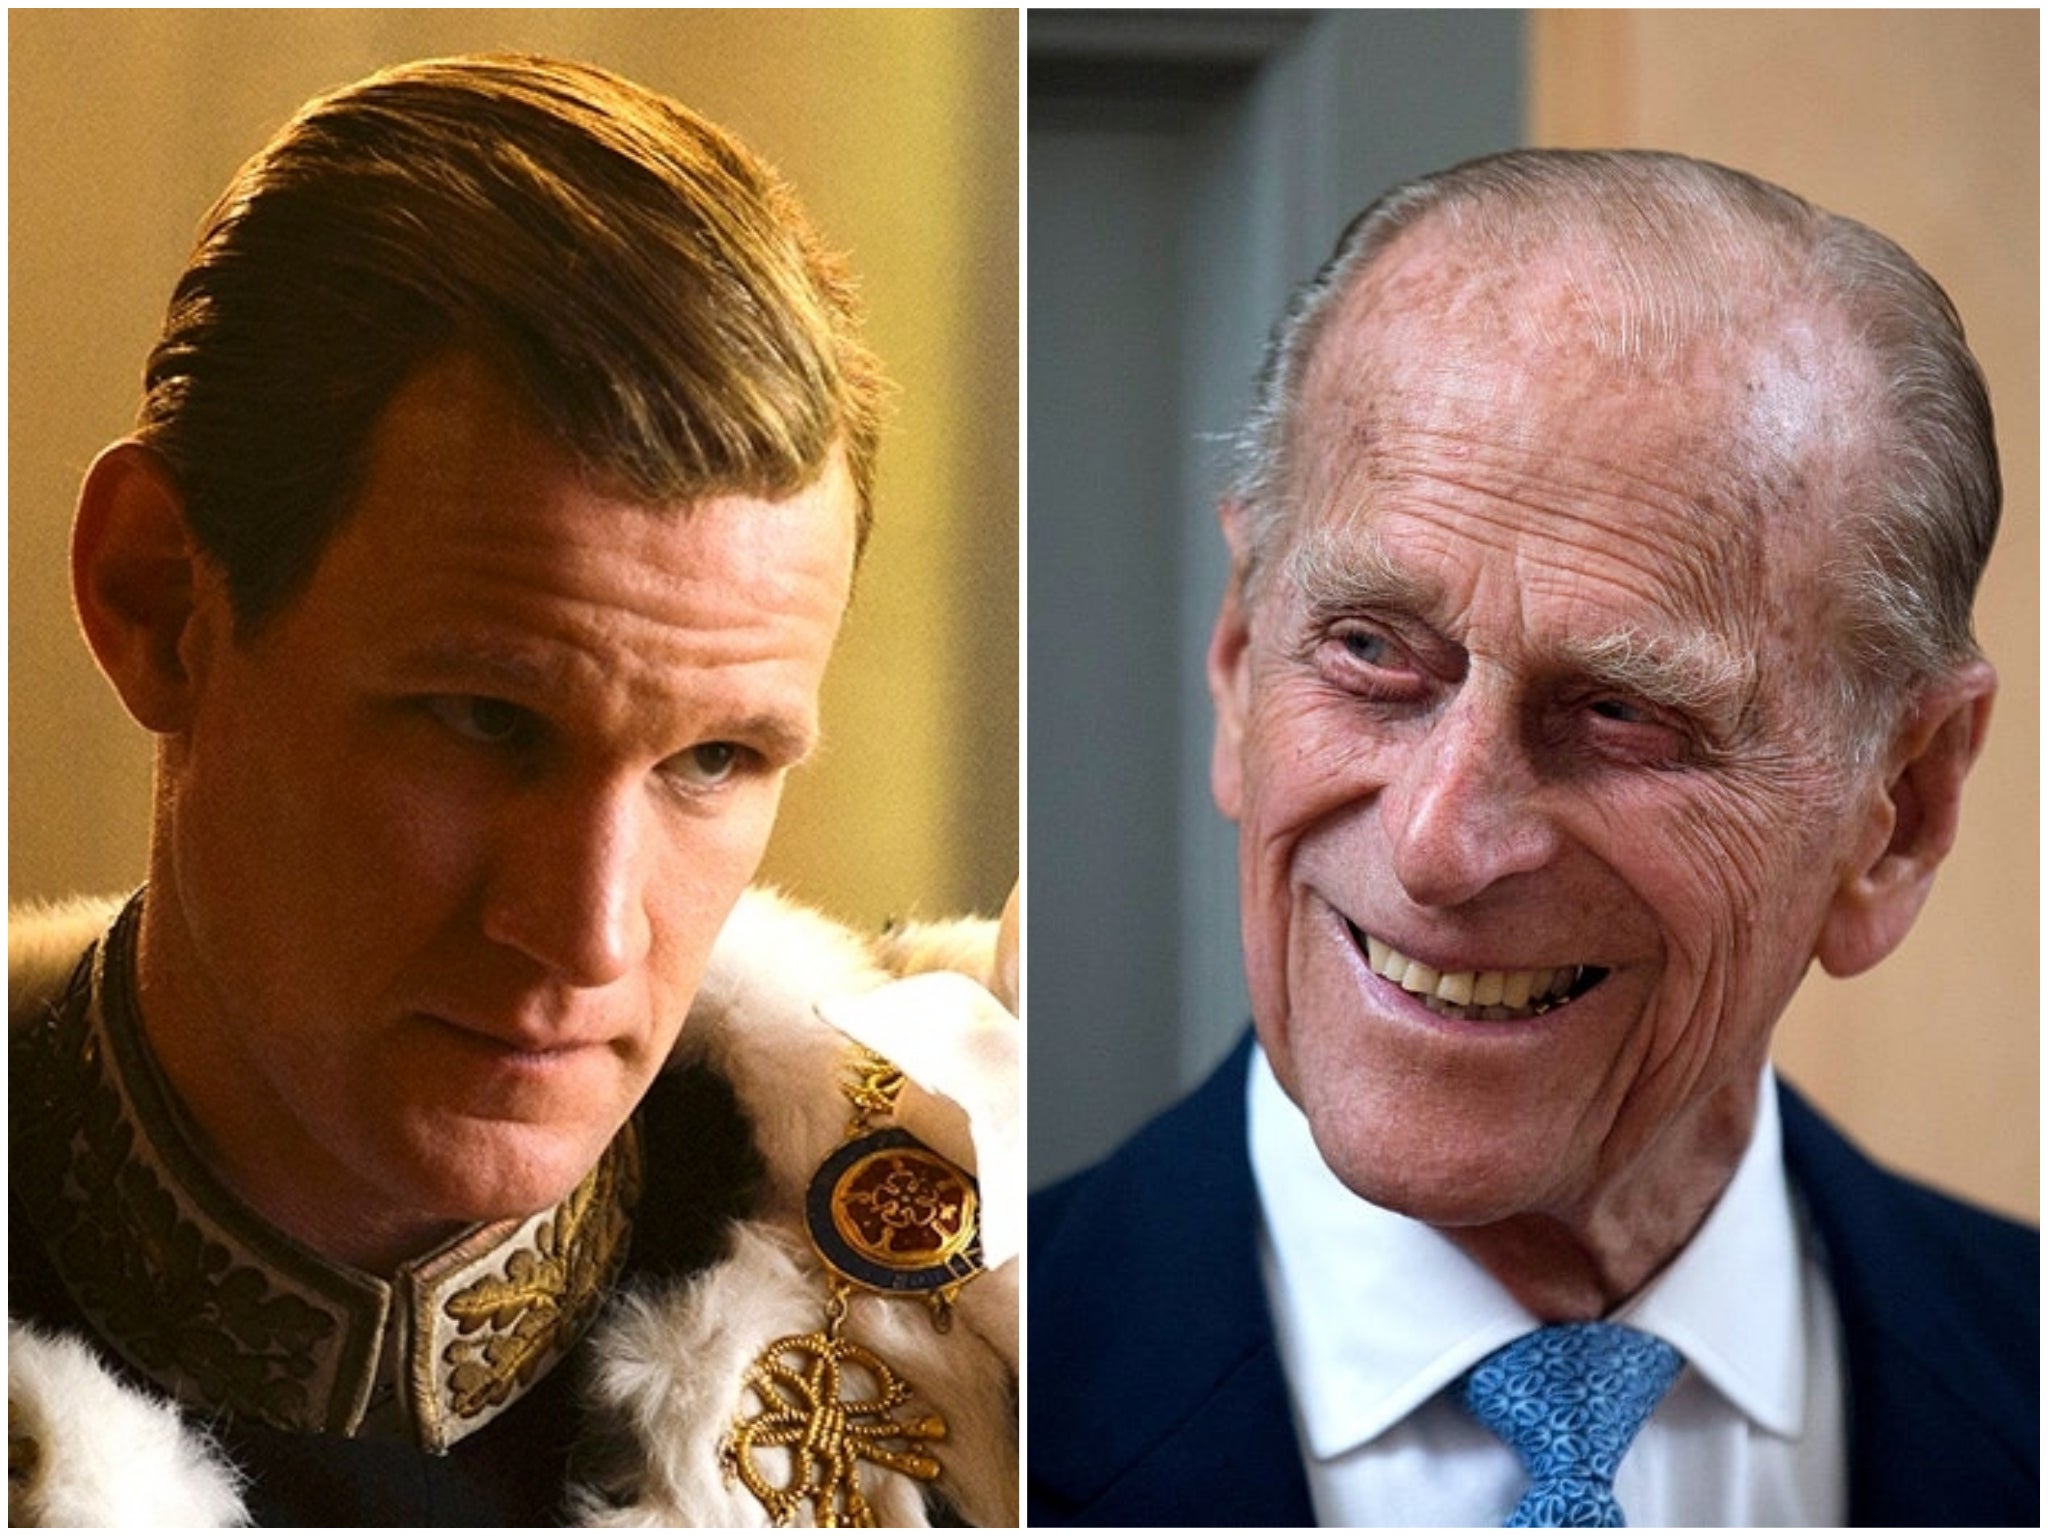 Matt Smith as Prince Philip in The Crown, and the real Prince Philip